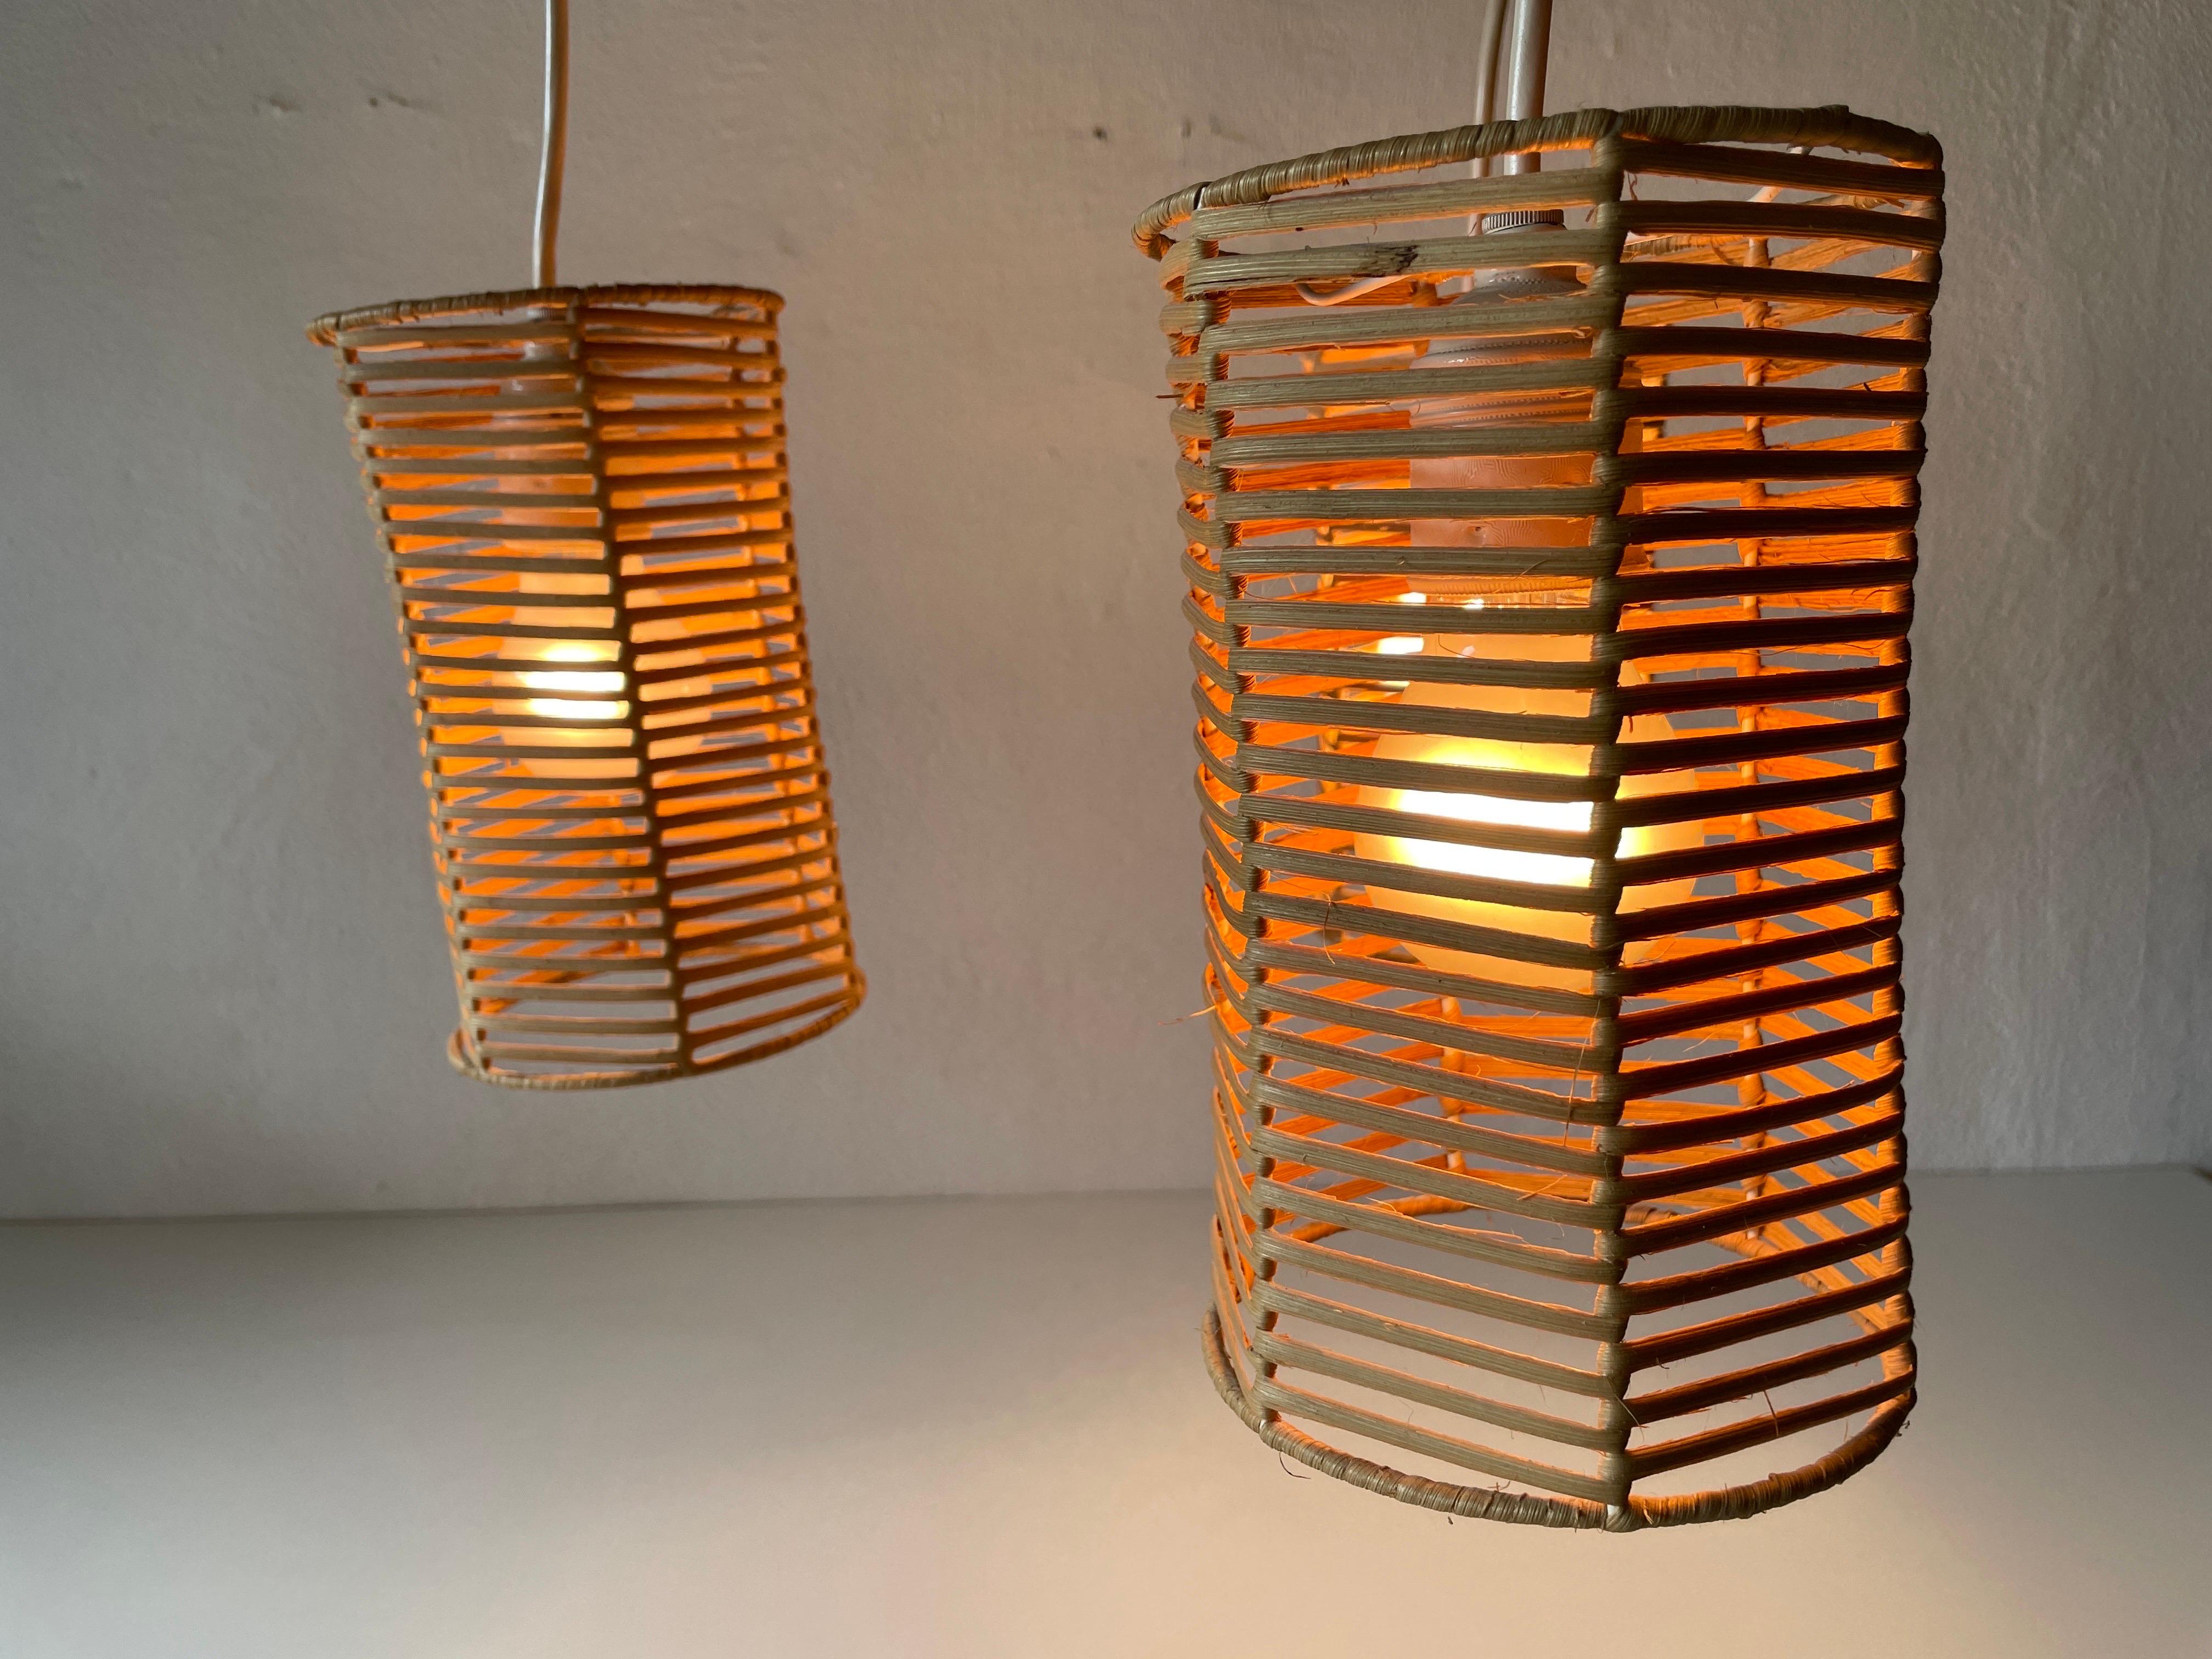 Triple Shade Wicker and Wood Pendant Lamp, 1960s, Germany For Sale 5